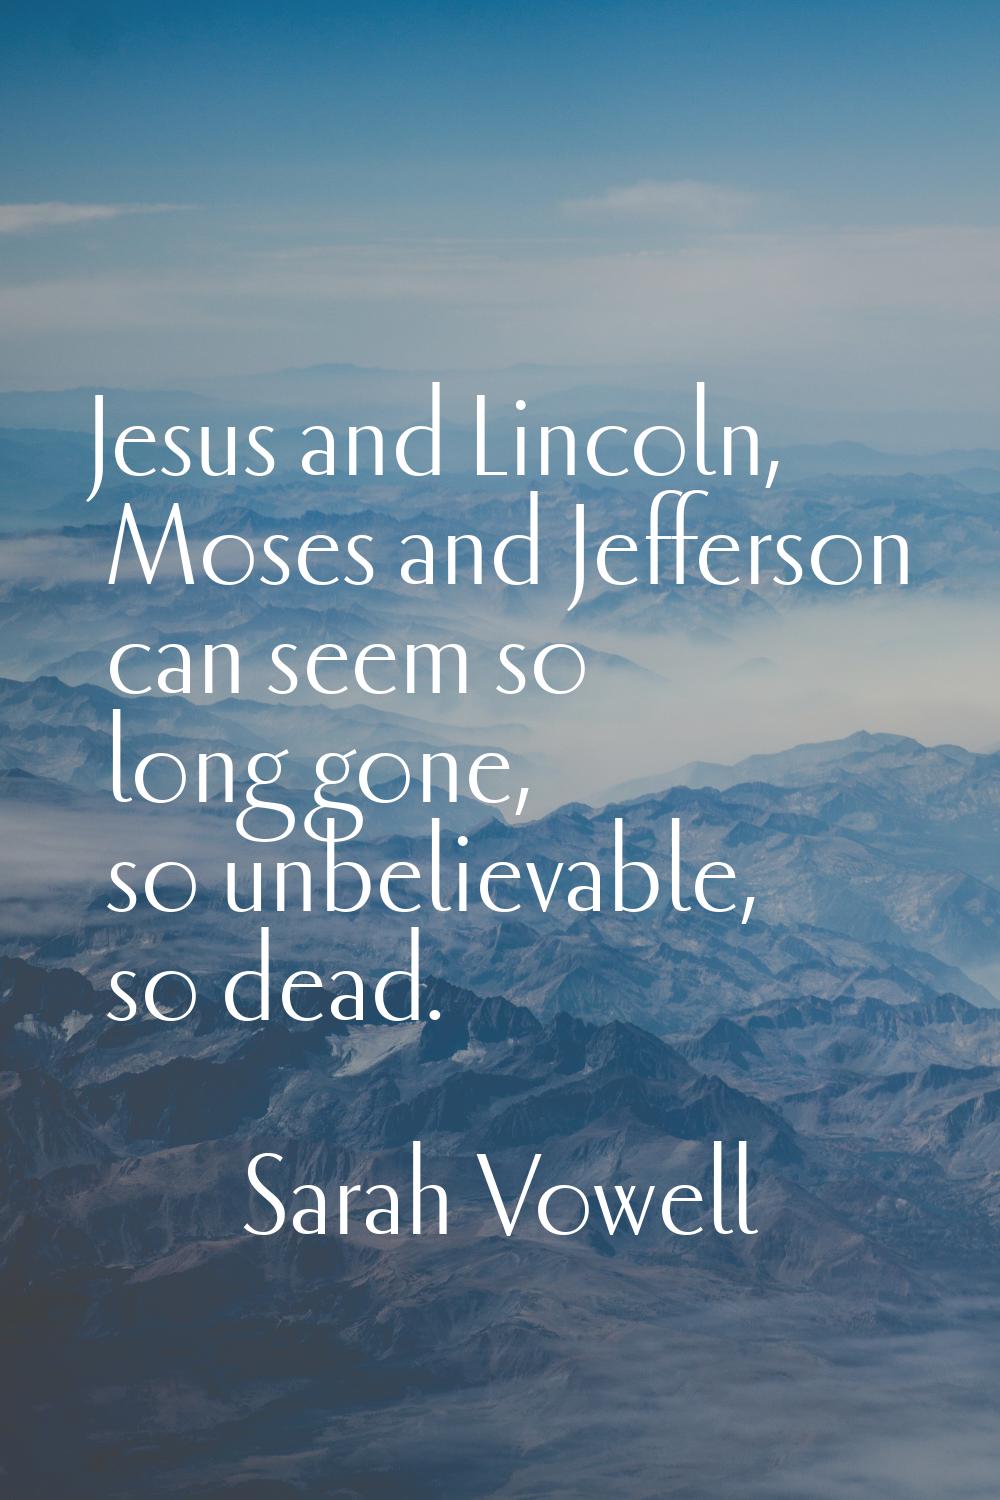 Jesus and Lincoln, Moses and Jefferson can seem so long gone, so unbelievable, so dead.